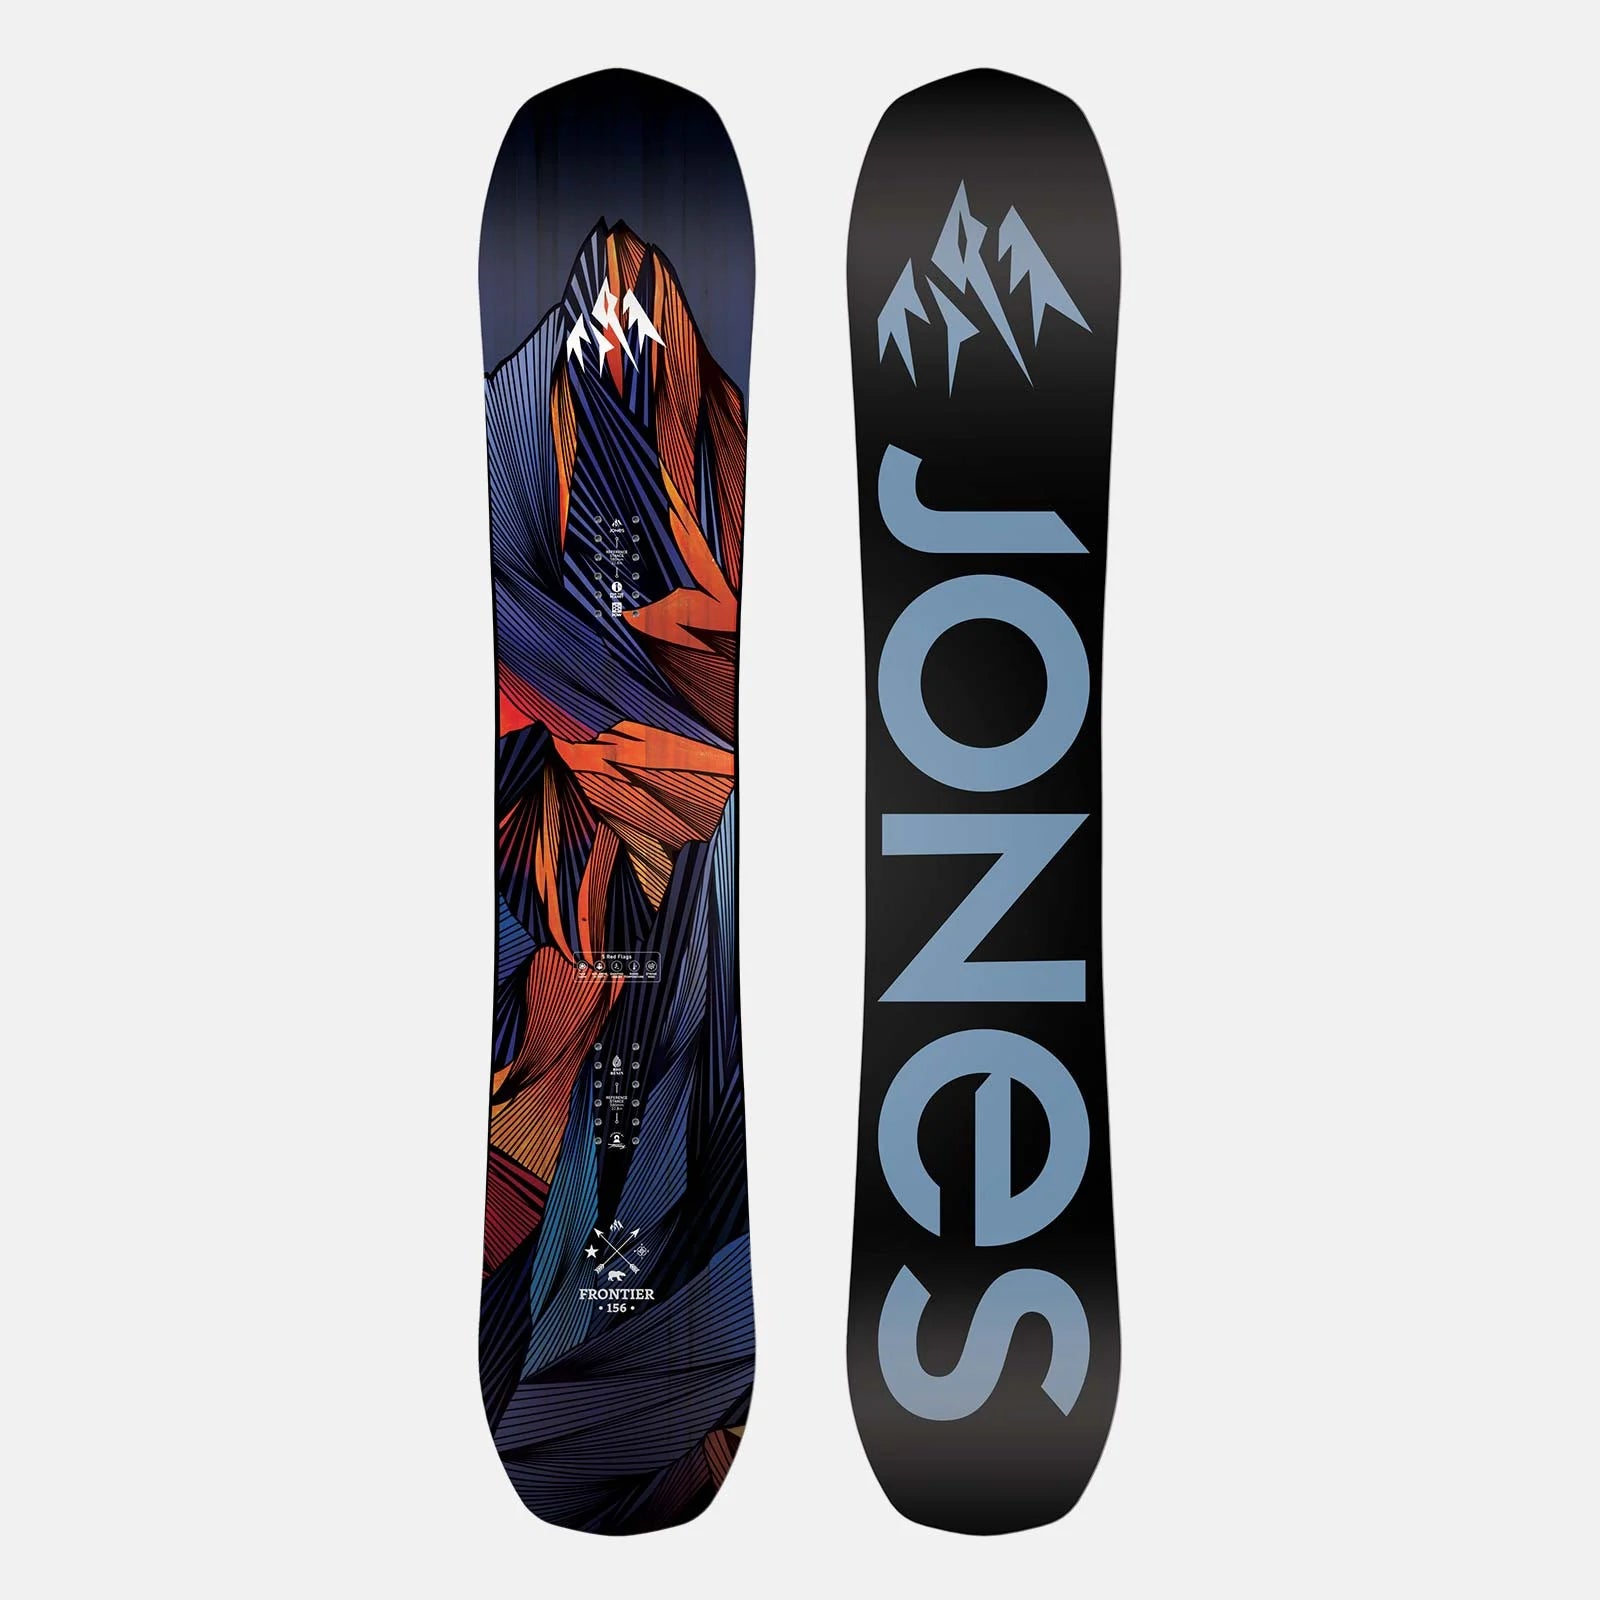 The Frontier is a directional freeride board with a friendly flex that's designed to be the perfect daily driver for the playful all-mountain shredder. Featuring a floaty, freeride nose matched with a freestyle tail, the Frontier is ideal for pow days, park days and every day in between.